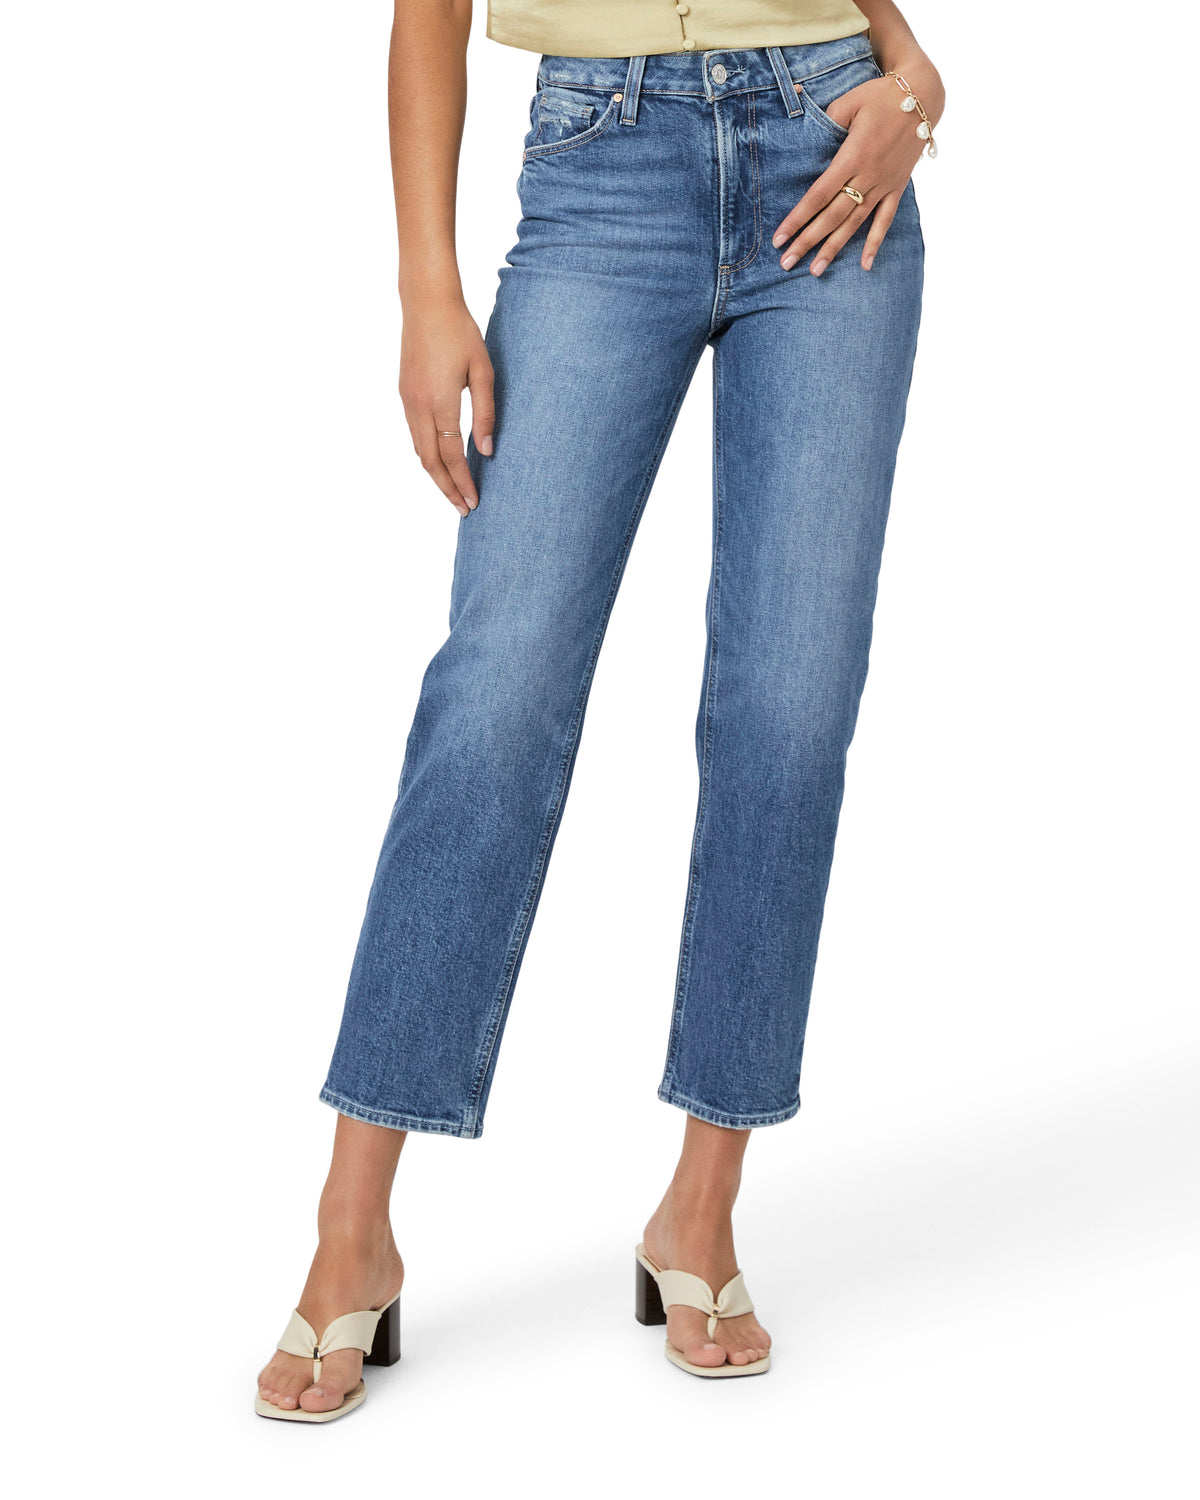 Ankle length straight cut high rise jeans in mid wash denim